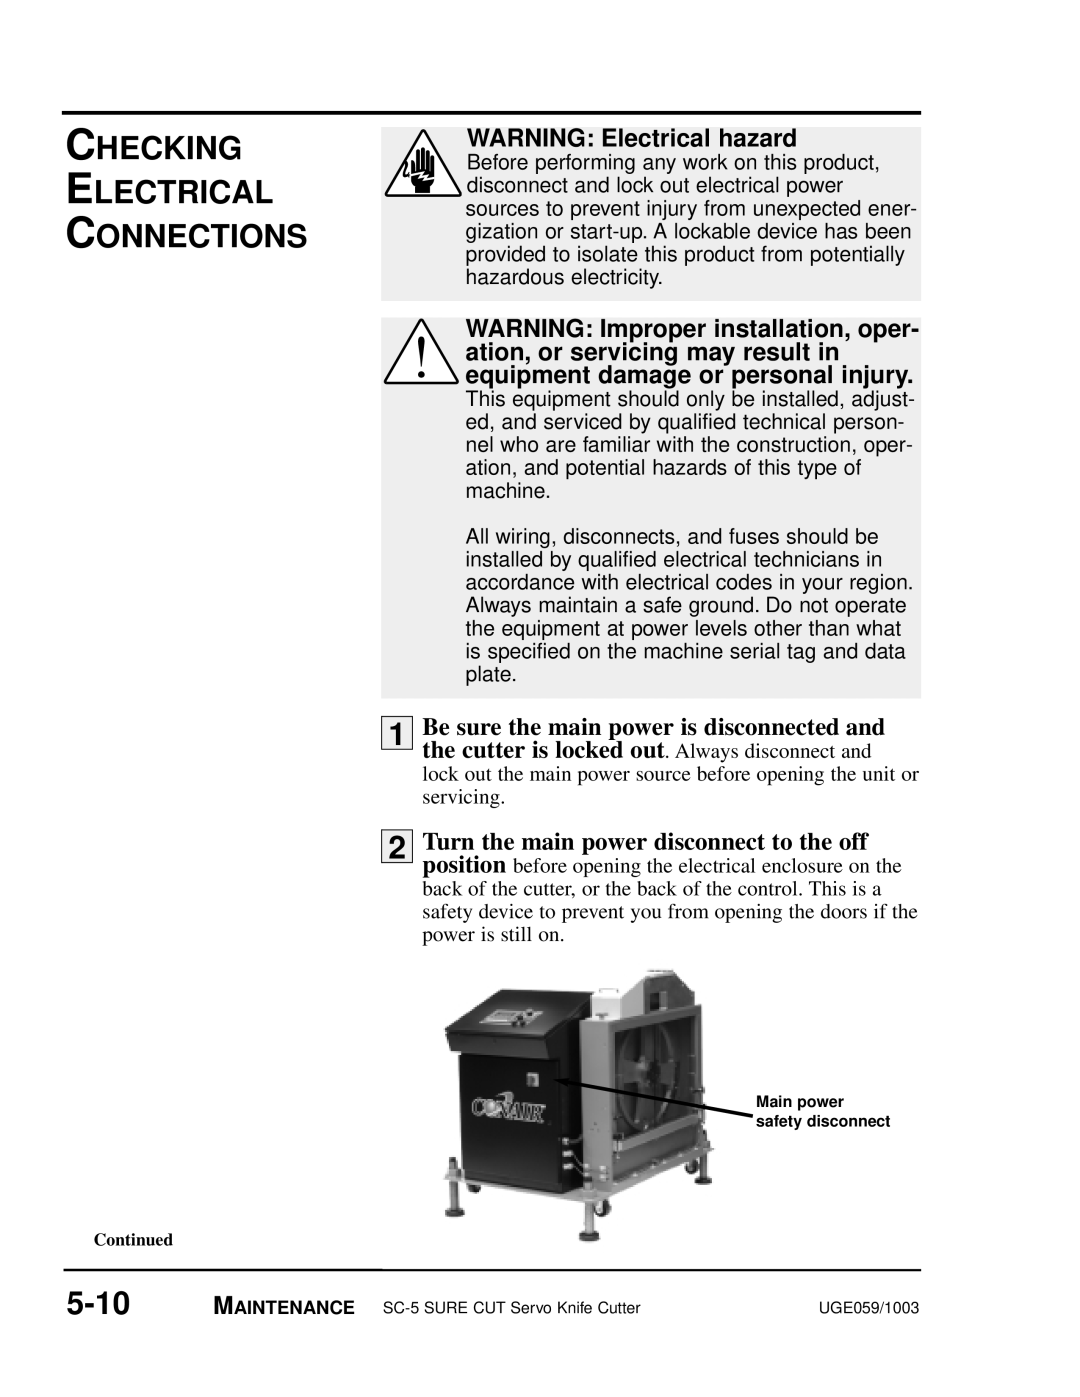 Conair SC-5 manual Checking Electrical Connections, 5-10, WARNING Electrical hazard, Main power safety disconnect 